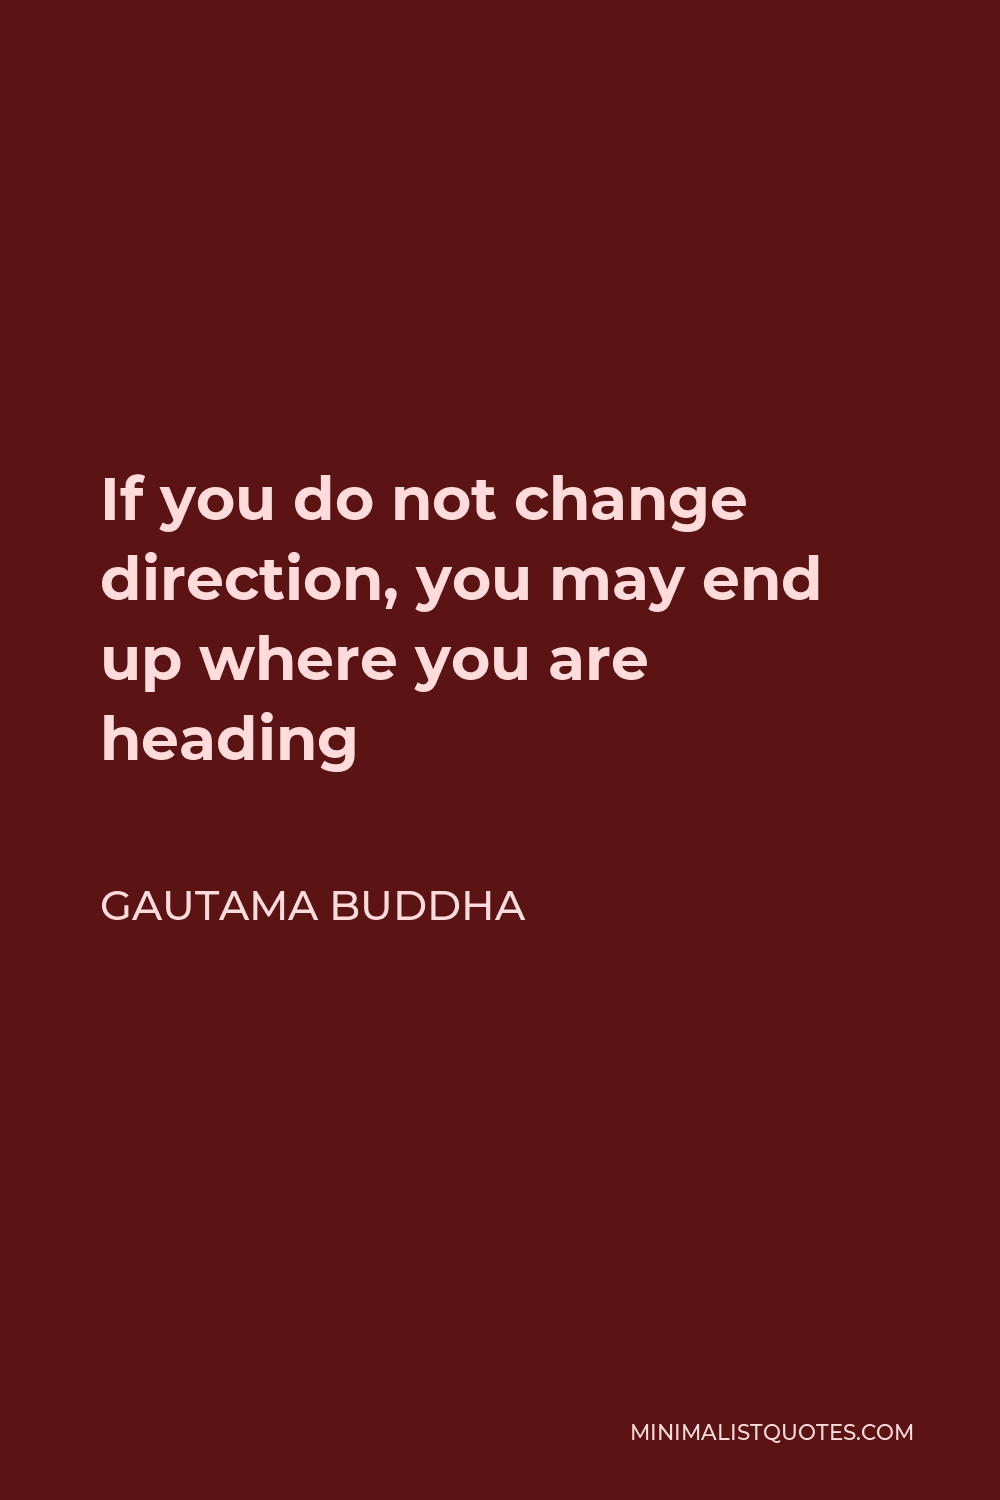 Gautama Buddha Quote - If you do not change direction, you may end up where you are heading